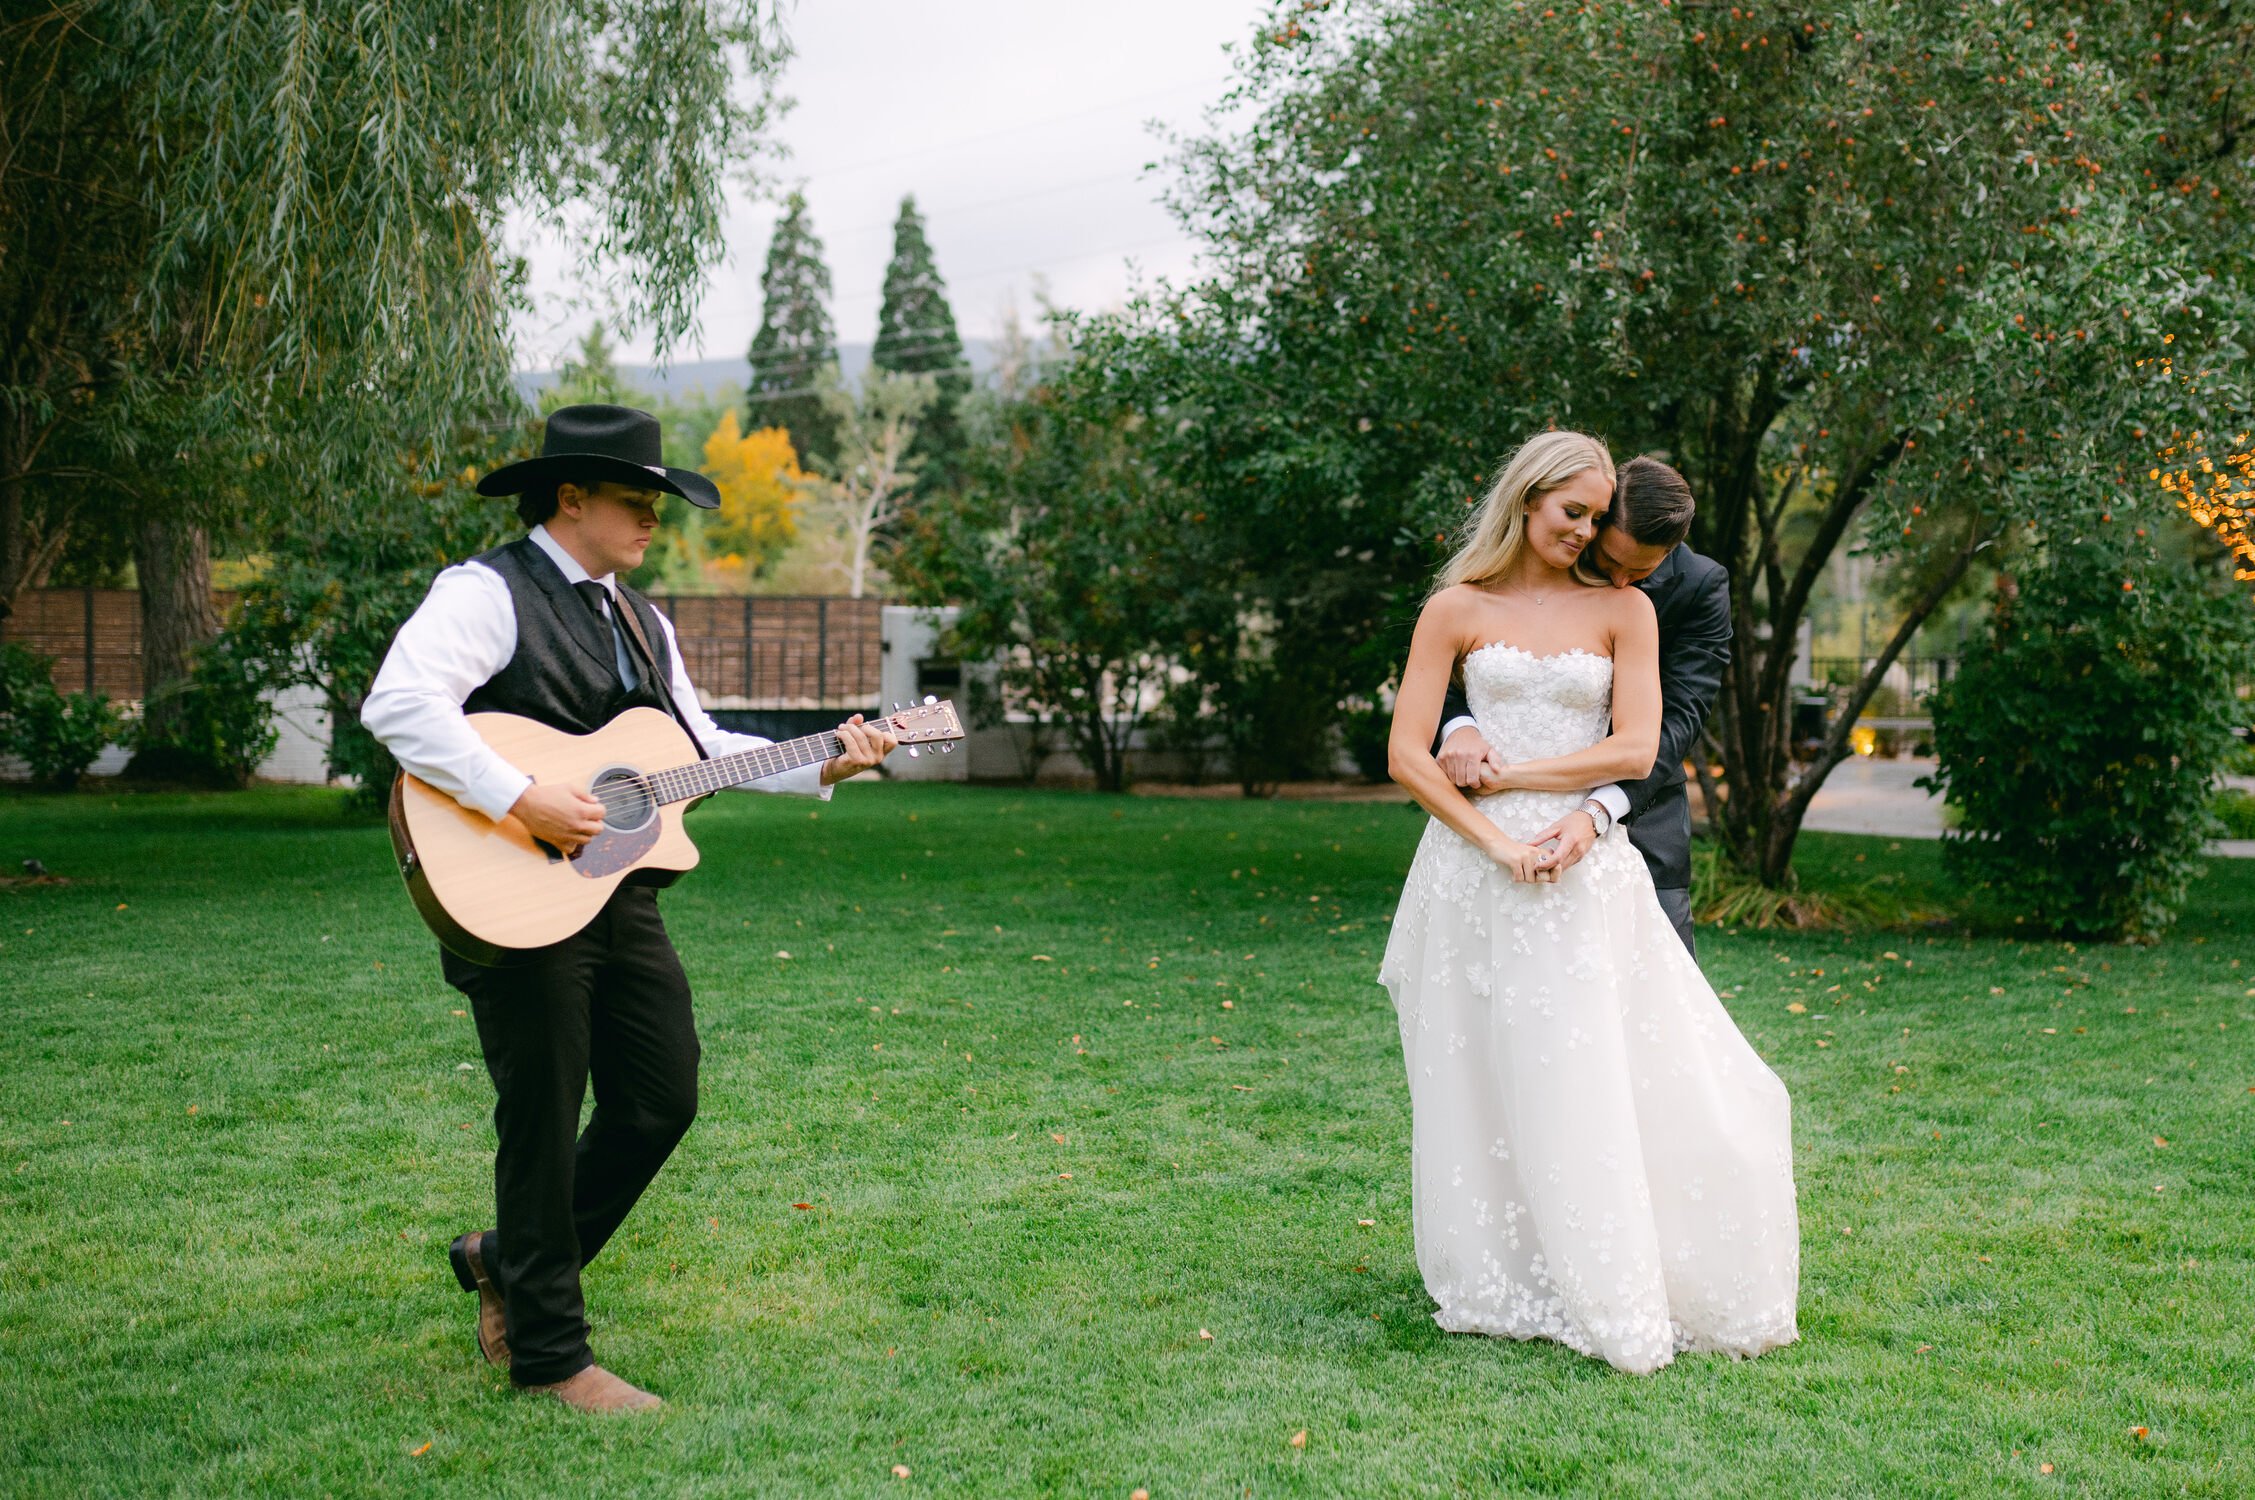 Elm Estate Wedding photos, photo of the artist serenading the newlywed couple outdoors